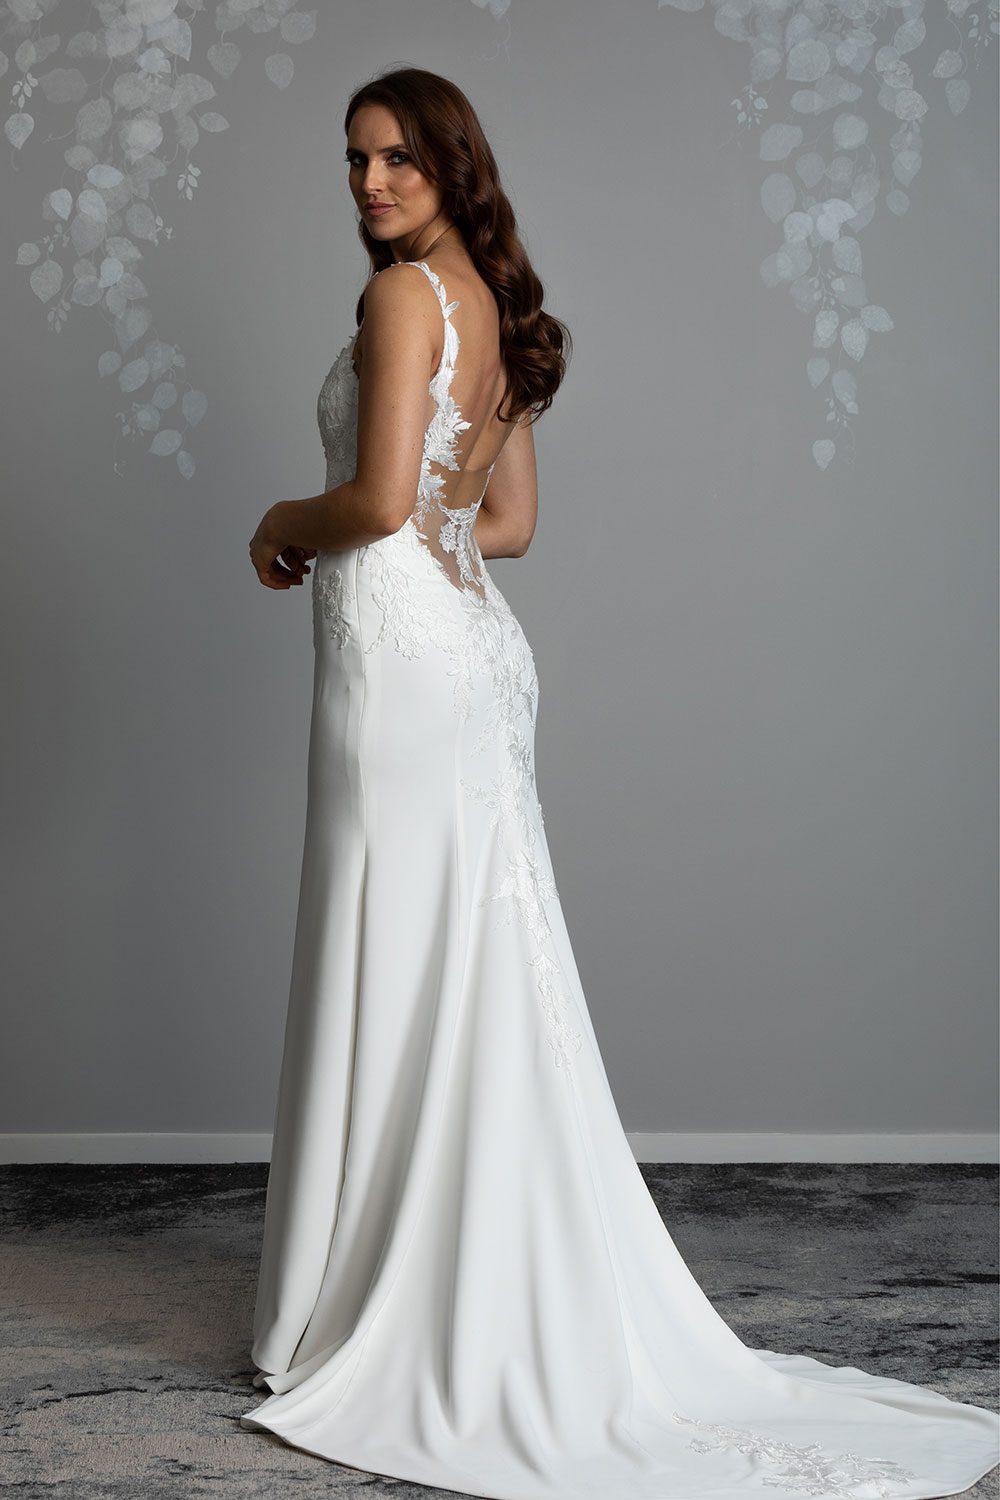 Ana Wedding gown from Vinka Design - This beautiful gown is graced by hand-appliqued delicate floral leaf lace, subtly worked into the front of the bodice and more prominently on the back. A fit-and-flare cut shapes the figure. Model wearing gown showing low back and lace detail - featured image